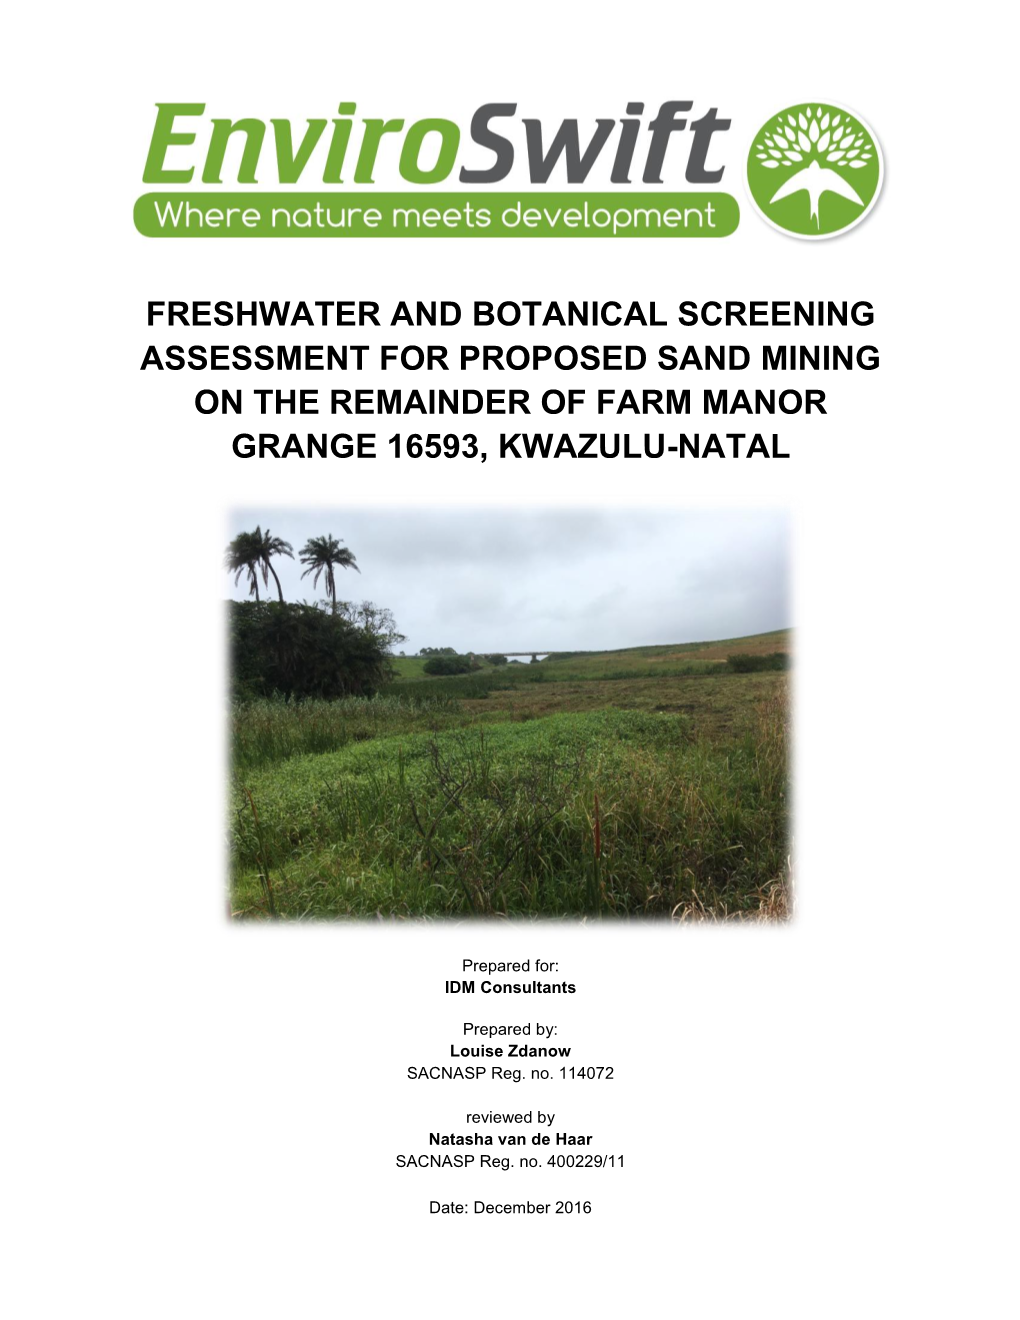 Freshwater and Botanical Screening Assessment for Proposed Sand Mining on the Remainder of Farm Manor